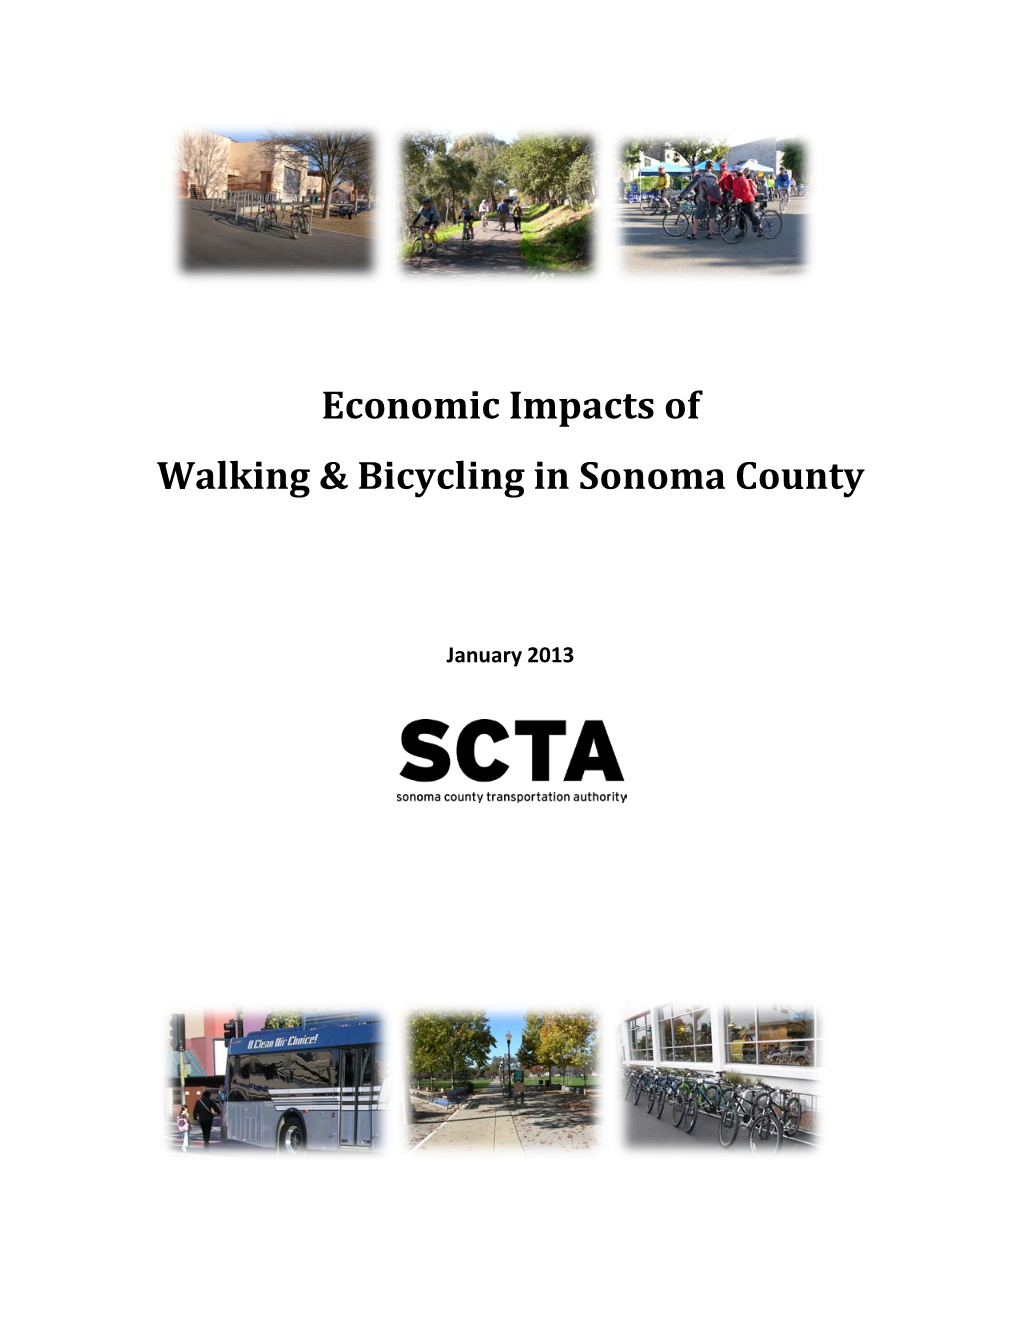 Economic Impact Study on Walking & Bicycling in Sonoma County